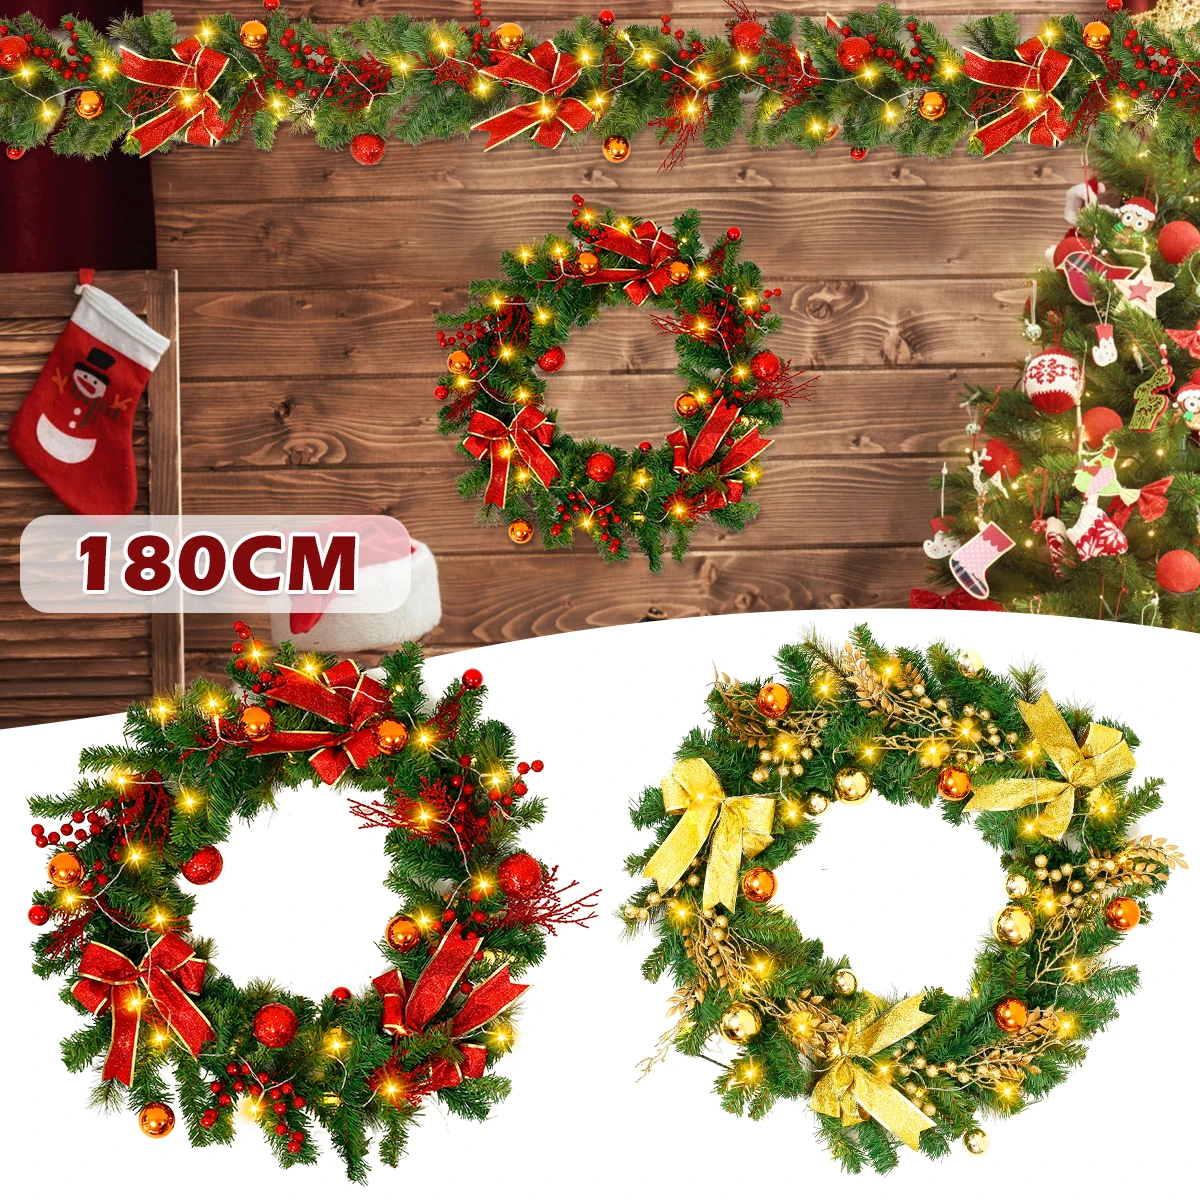 

6Ft/1.8m Christmas Garland with Lights Pre-Lit Artificial Christmas Garland Battery Operated National Tree Company Reusable